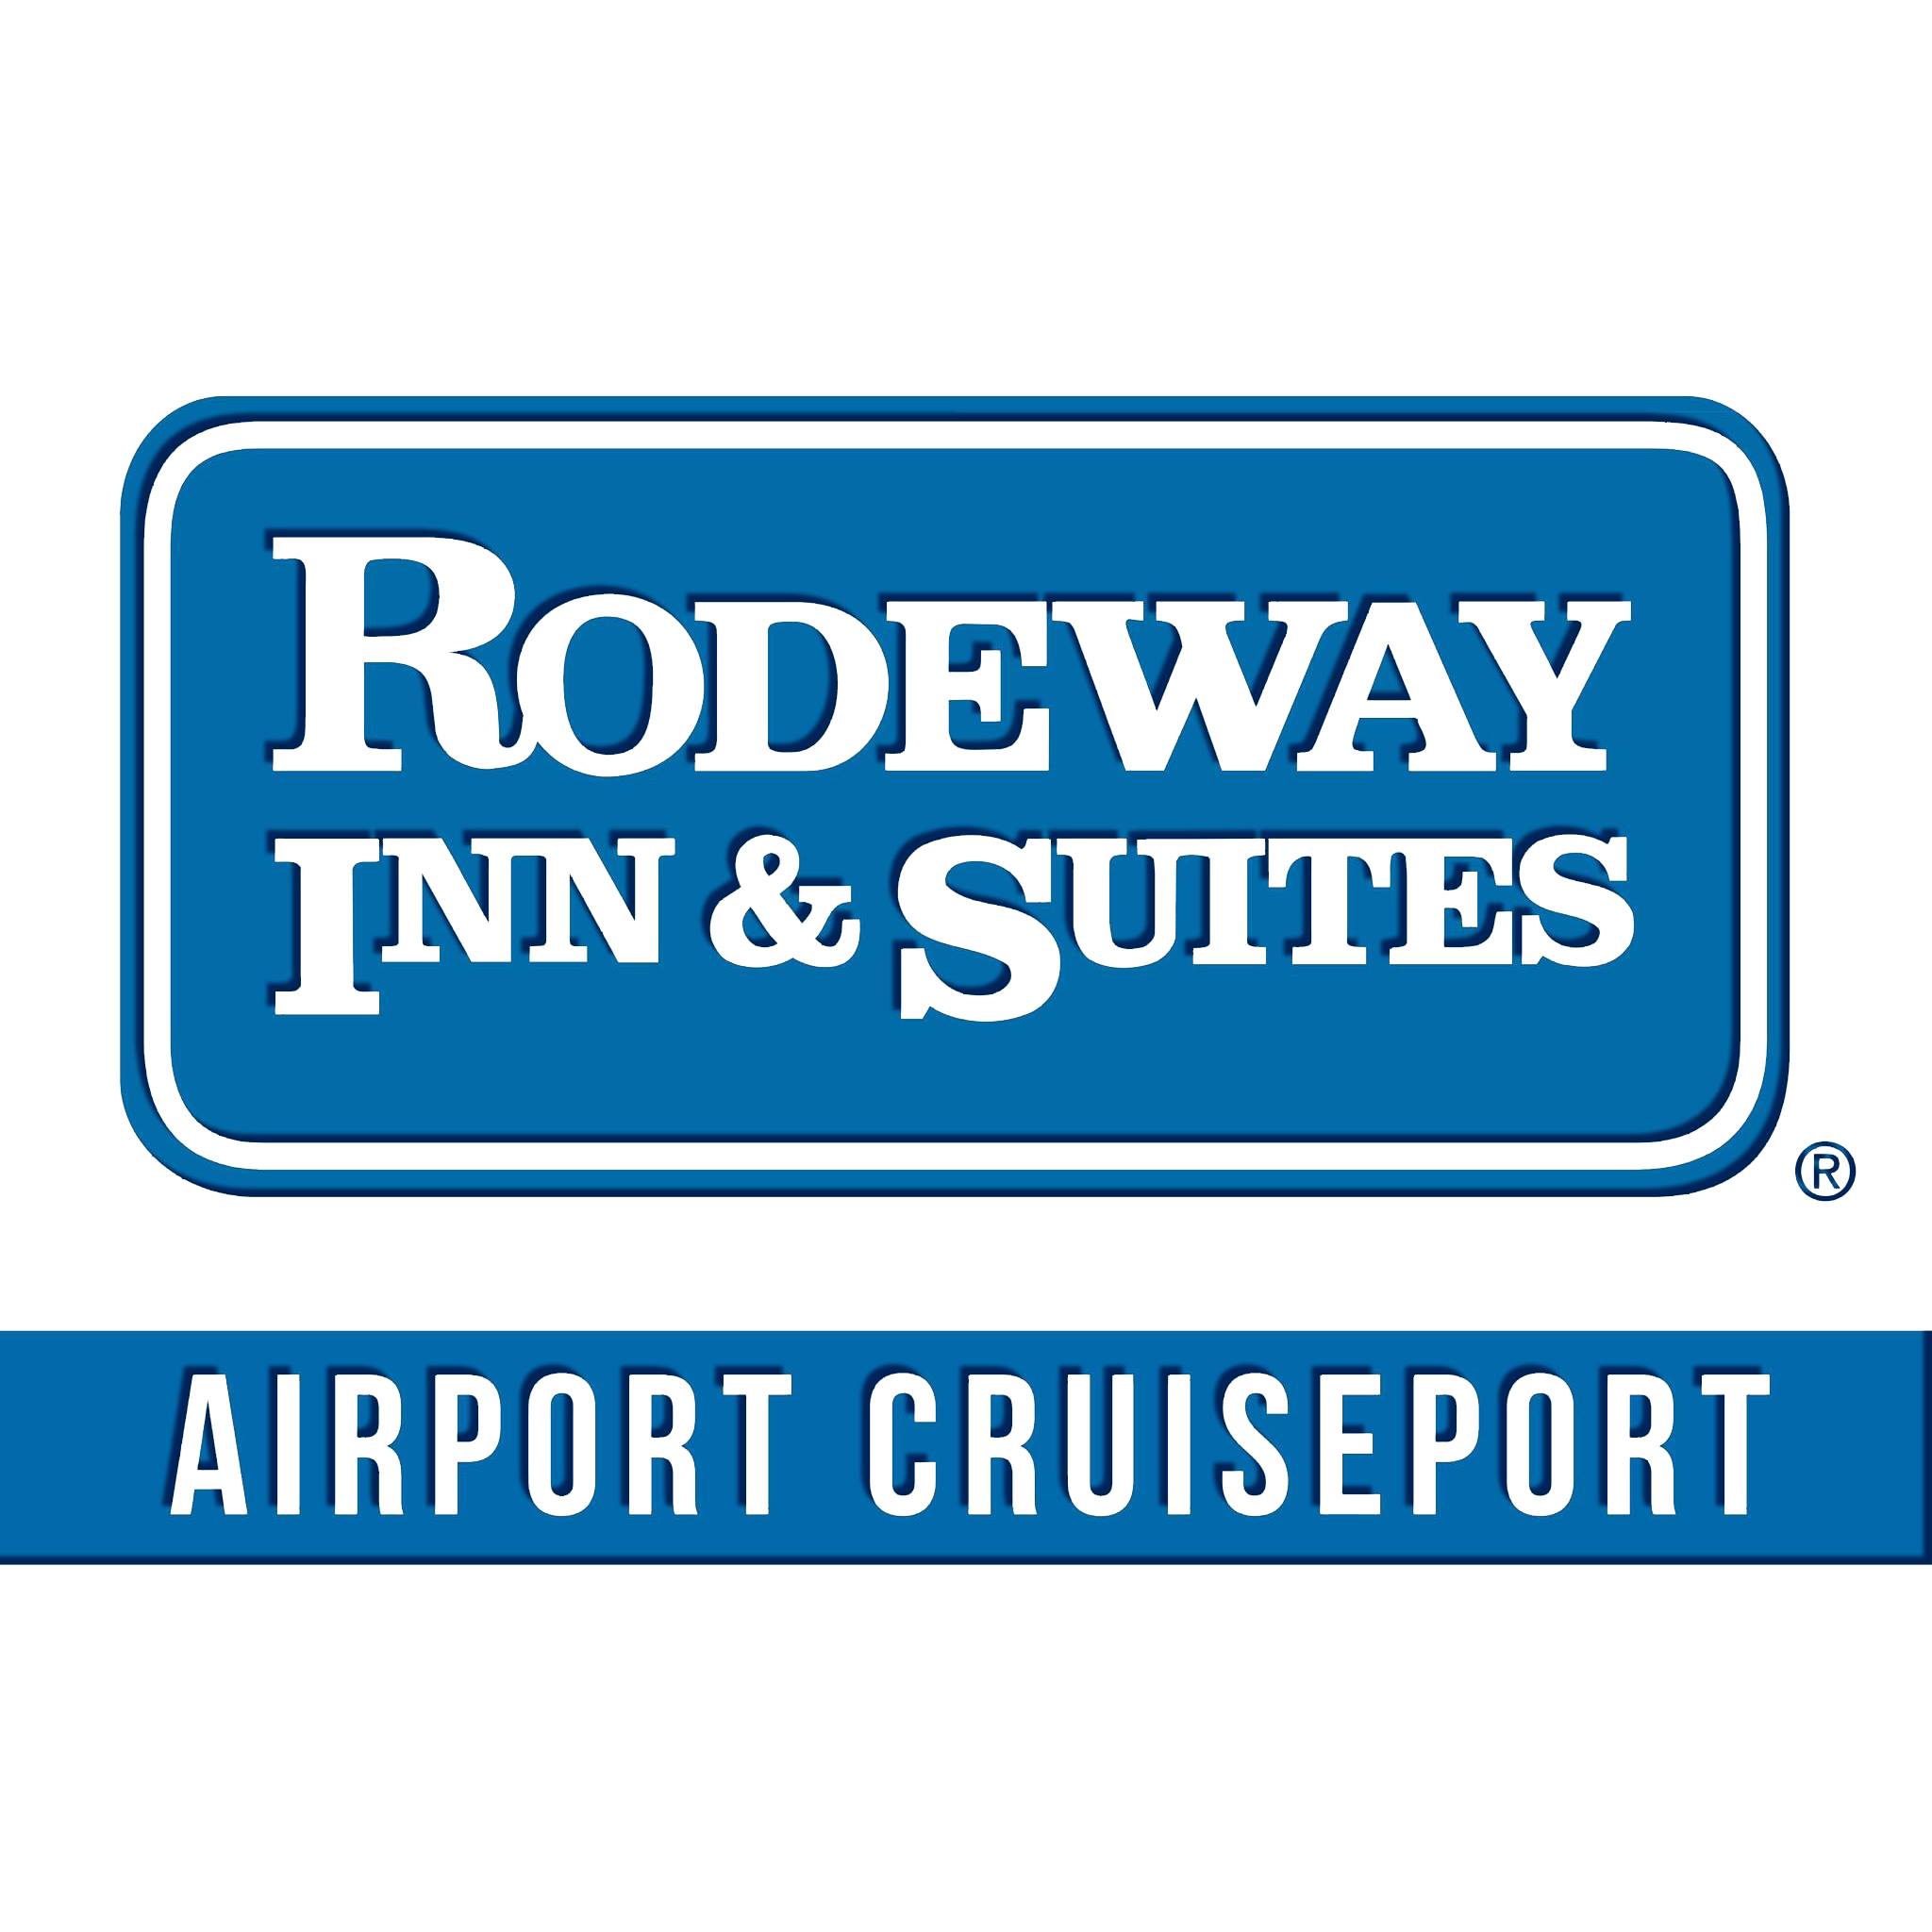 Rodeway Inn And Suites Fort Lauderdale Airport Cruise Port